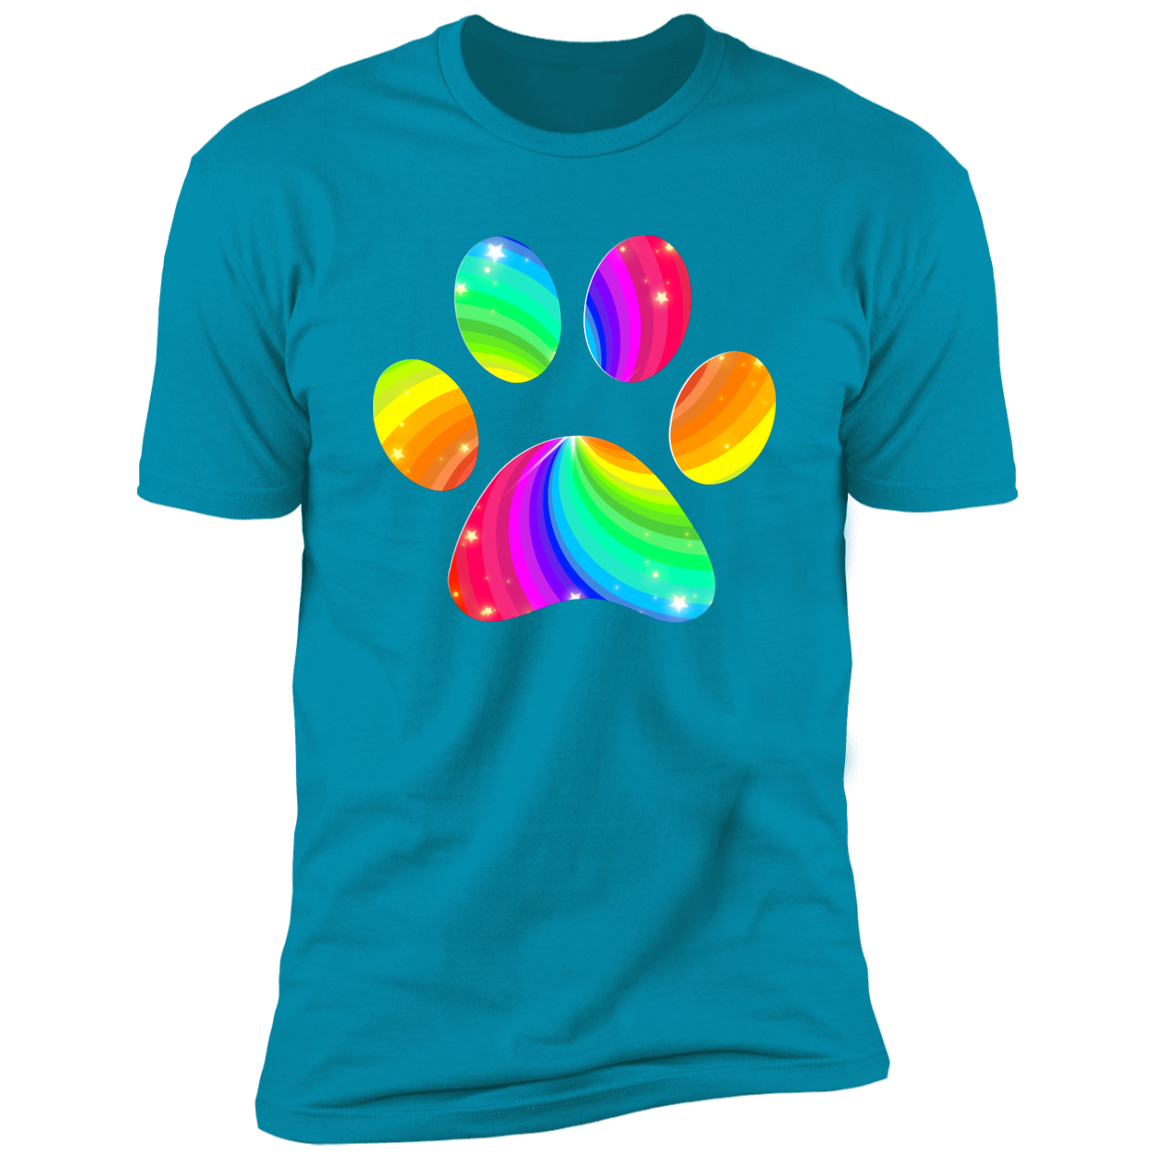 Pride Paw 2023 (Flag) Pride T-shirt, Paw Pride Dog Shirt for humans, in turquoise 